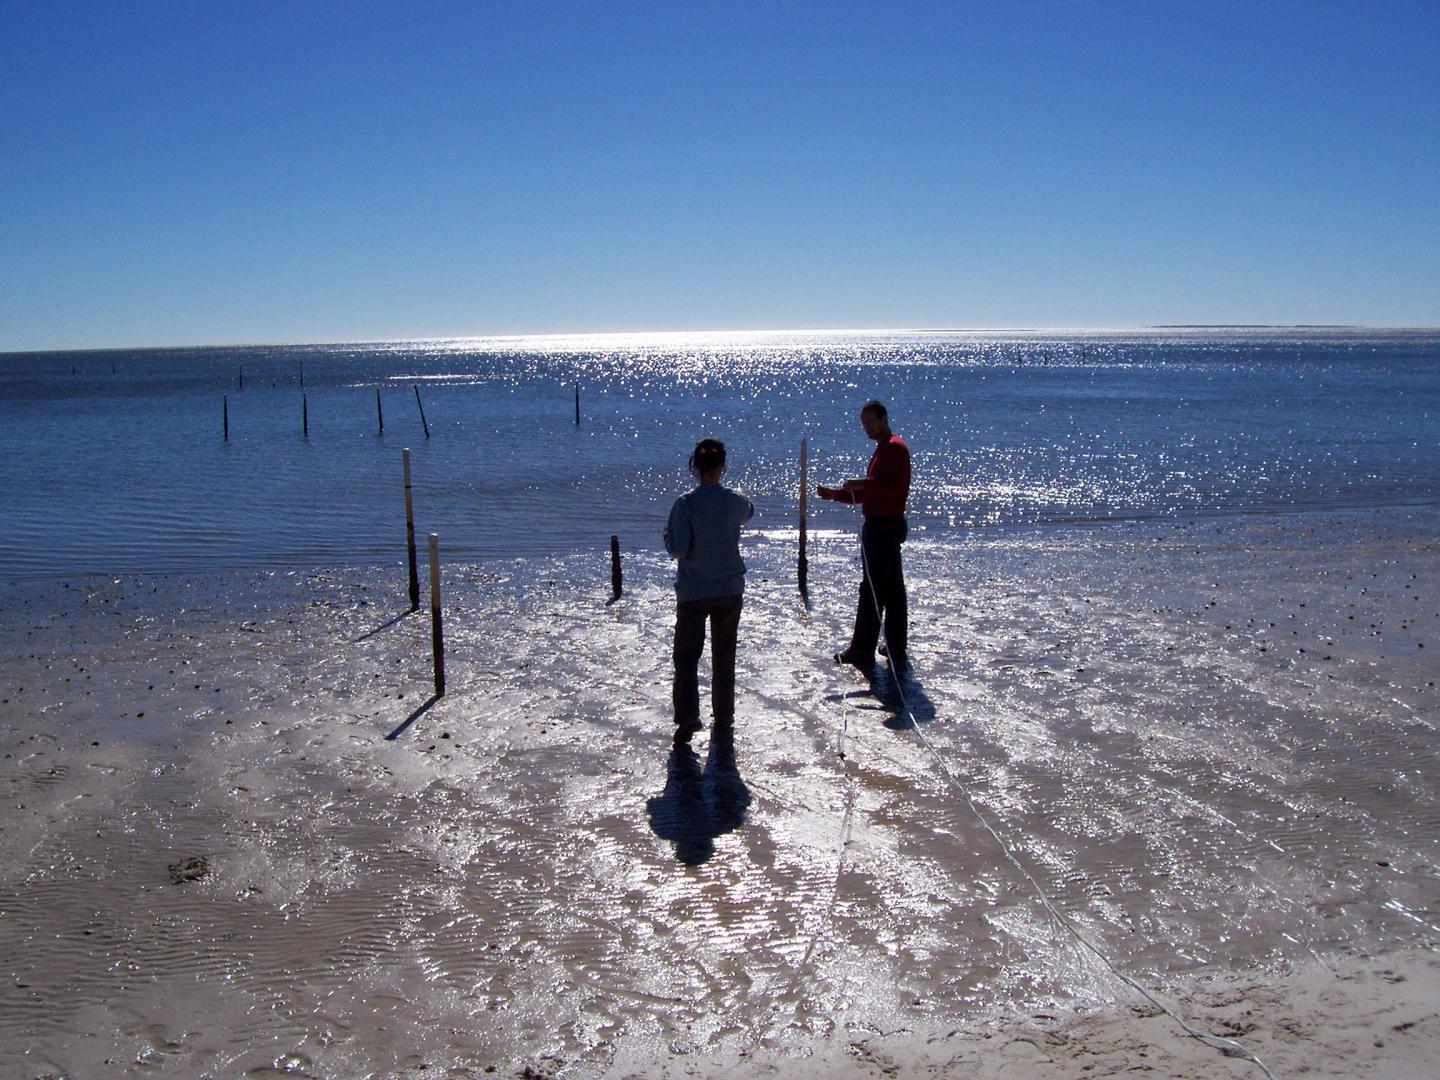 Submarine groundwater discharge is essential for the functioning of coastal ecosystems